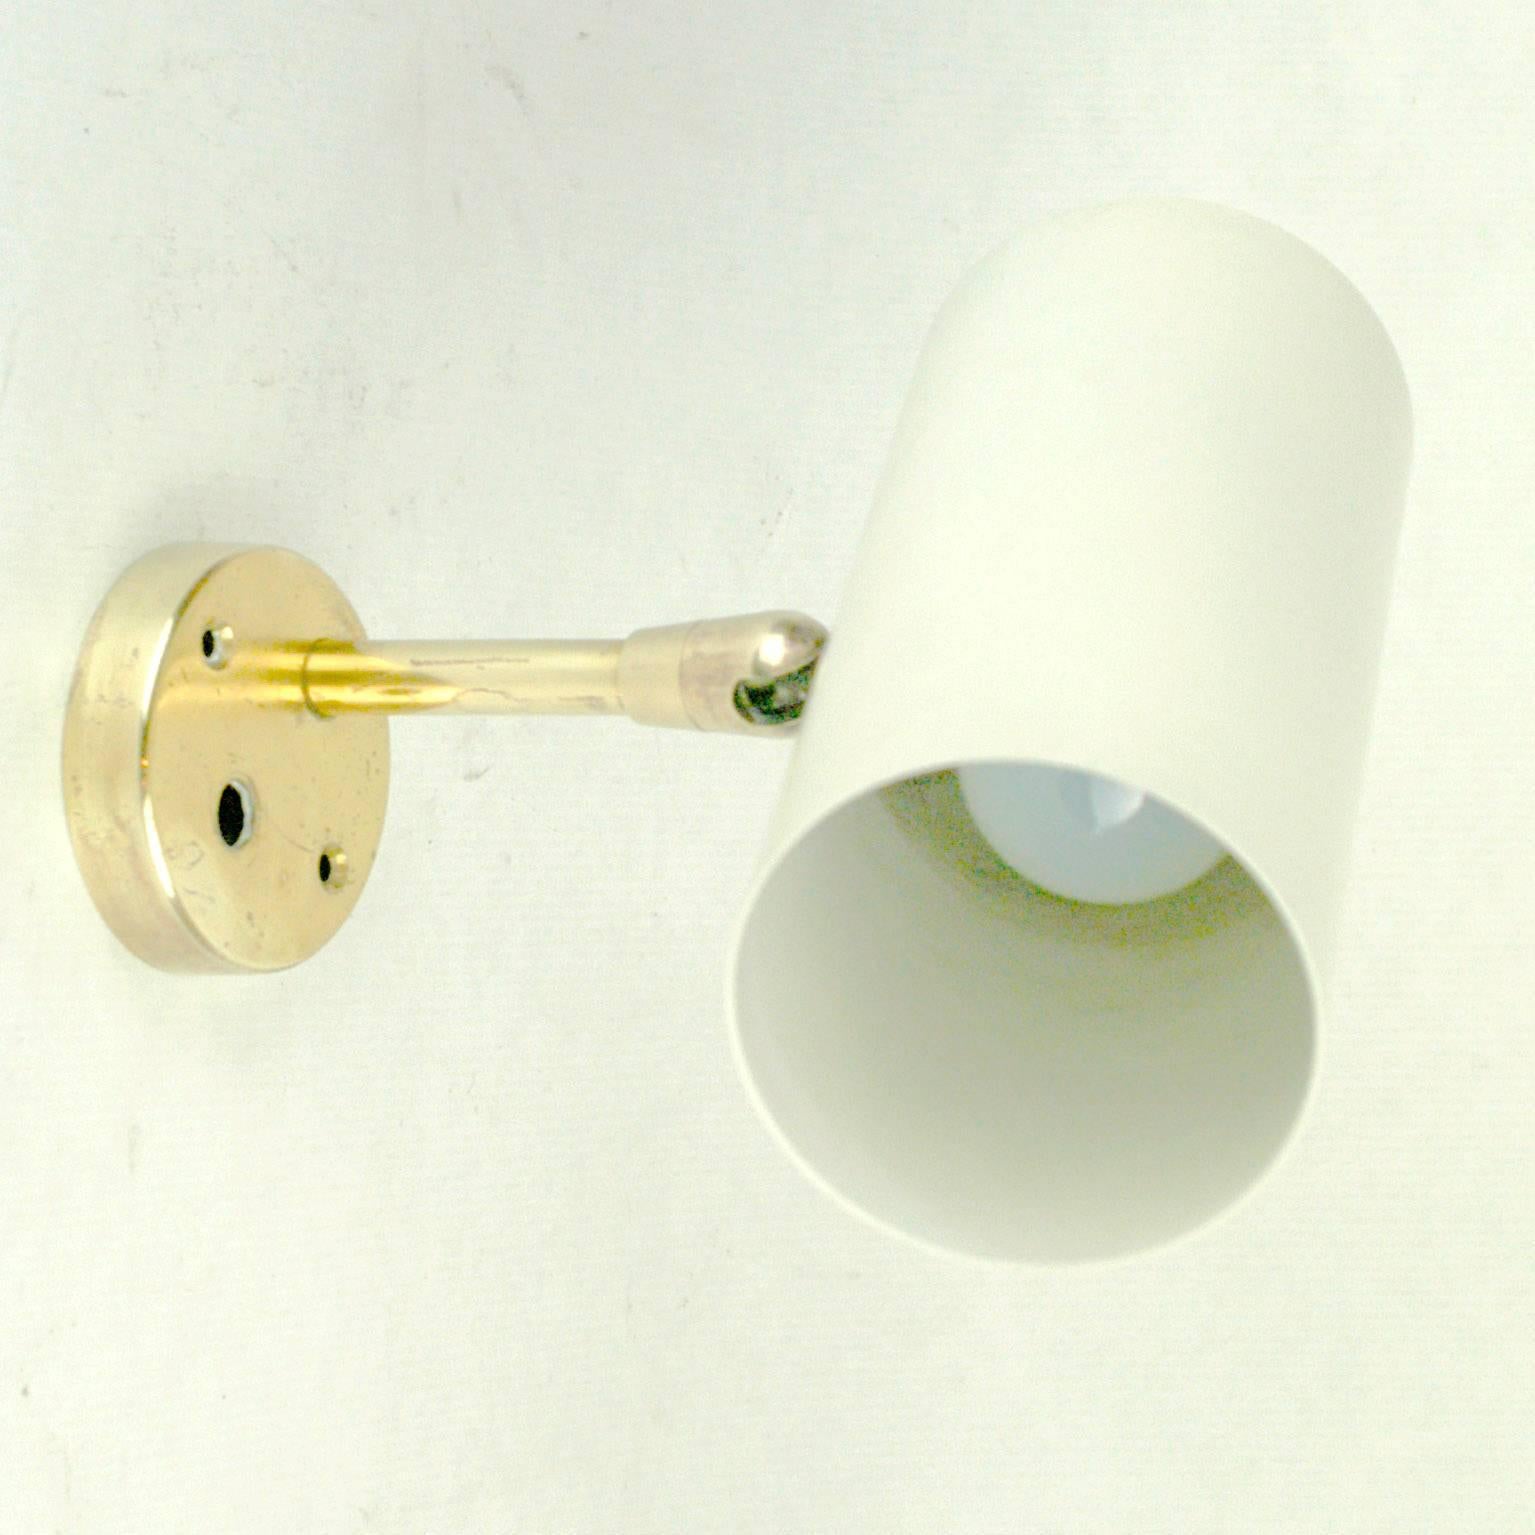 Pure and elegant Austrian Midcentury brass wall light with white lacquered zylindrical metal shade, which can be adjusted into different positions designed by J. T. Kalmar for Kalmar Vienna in the 1960s